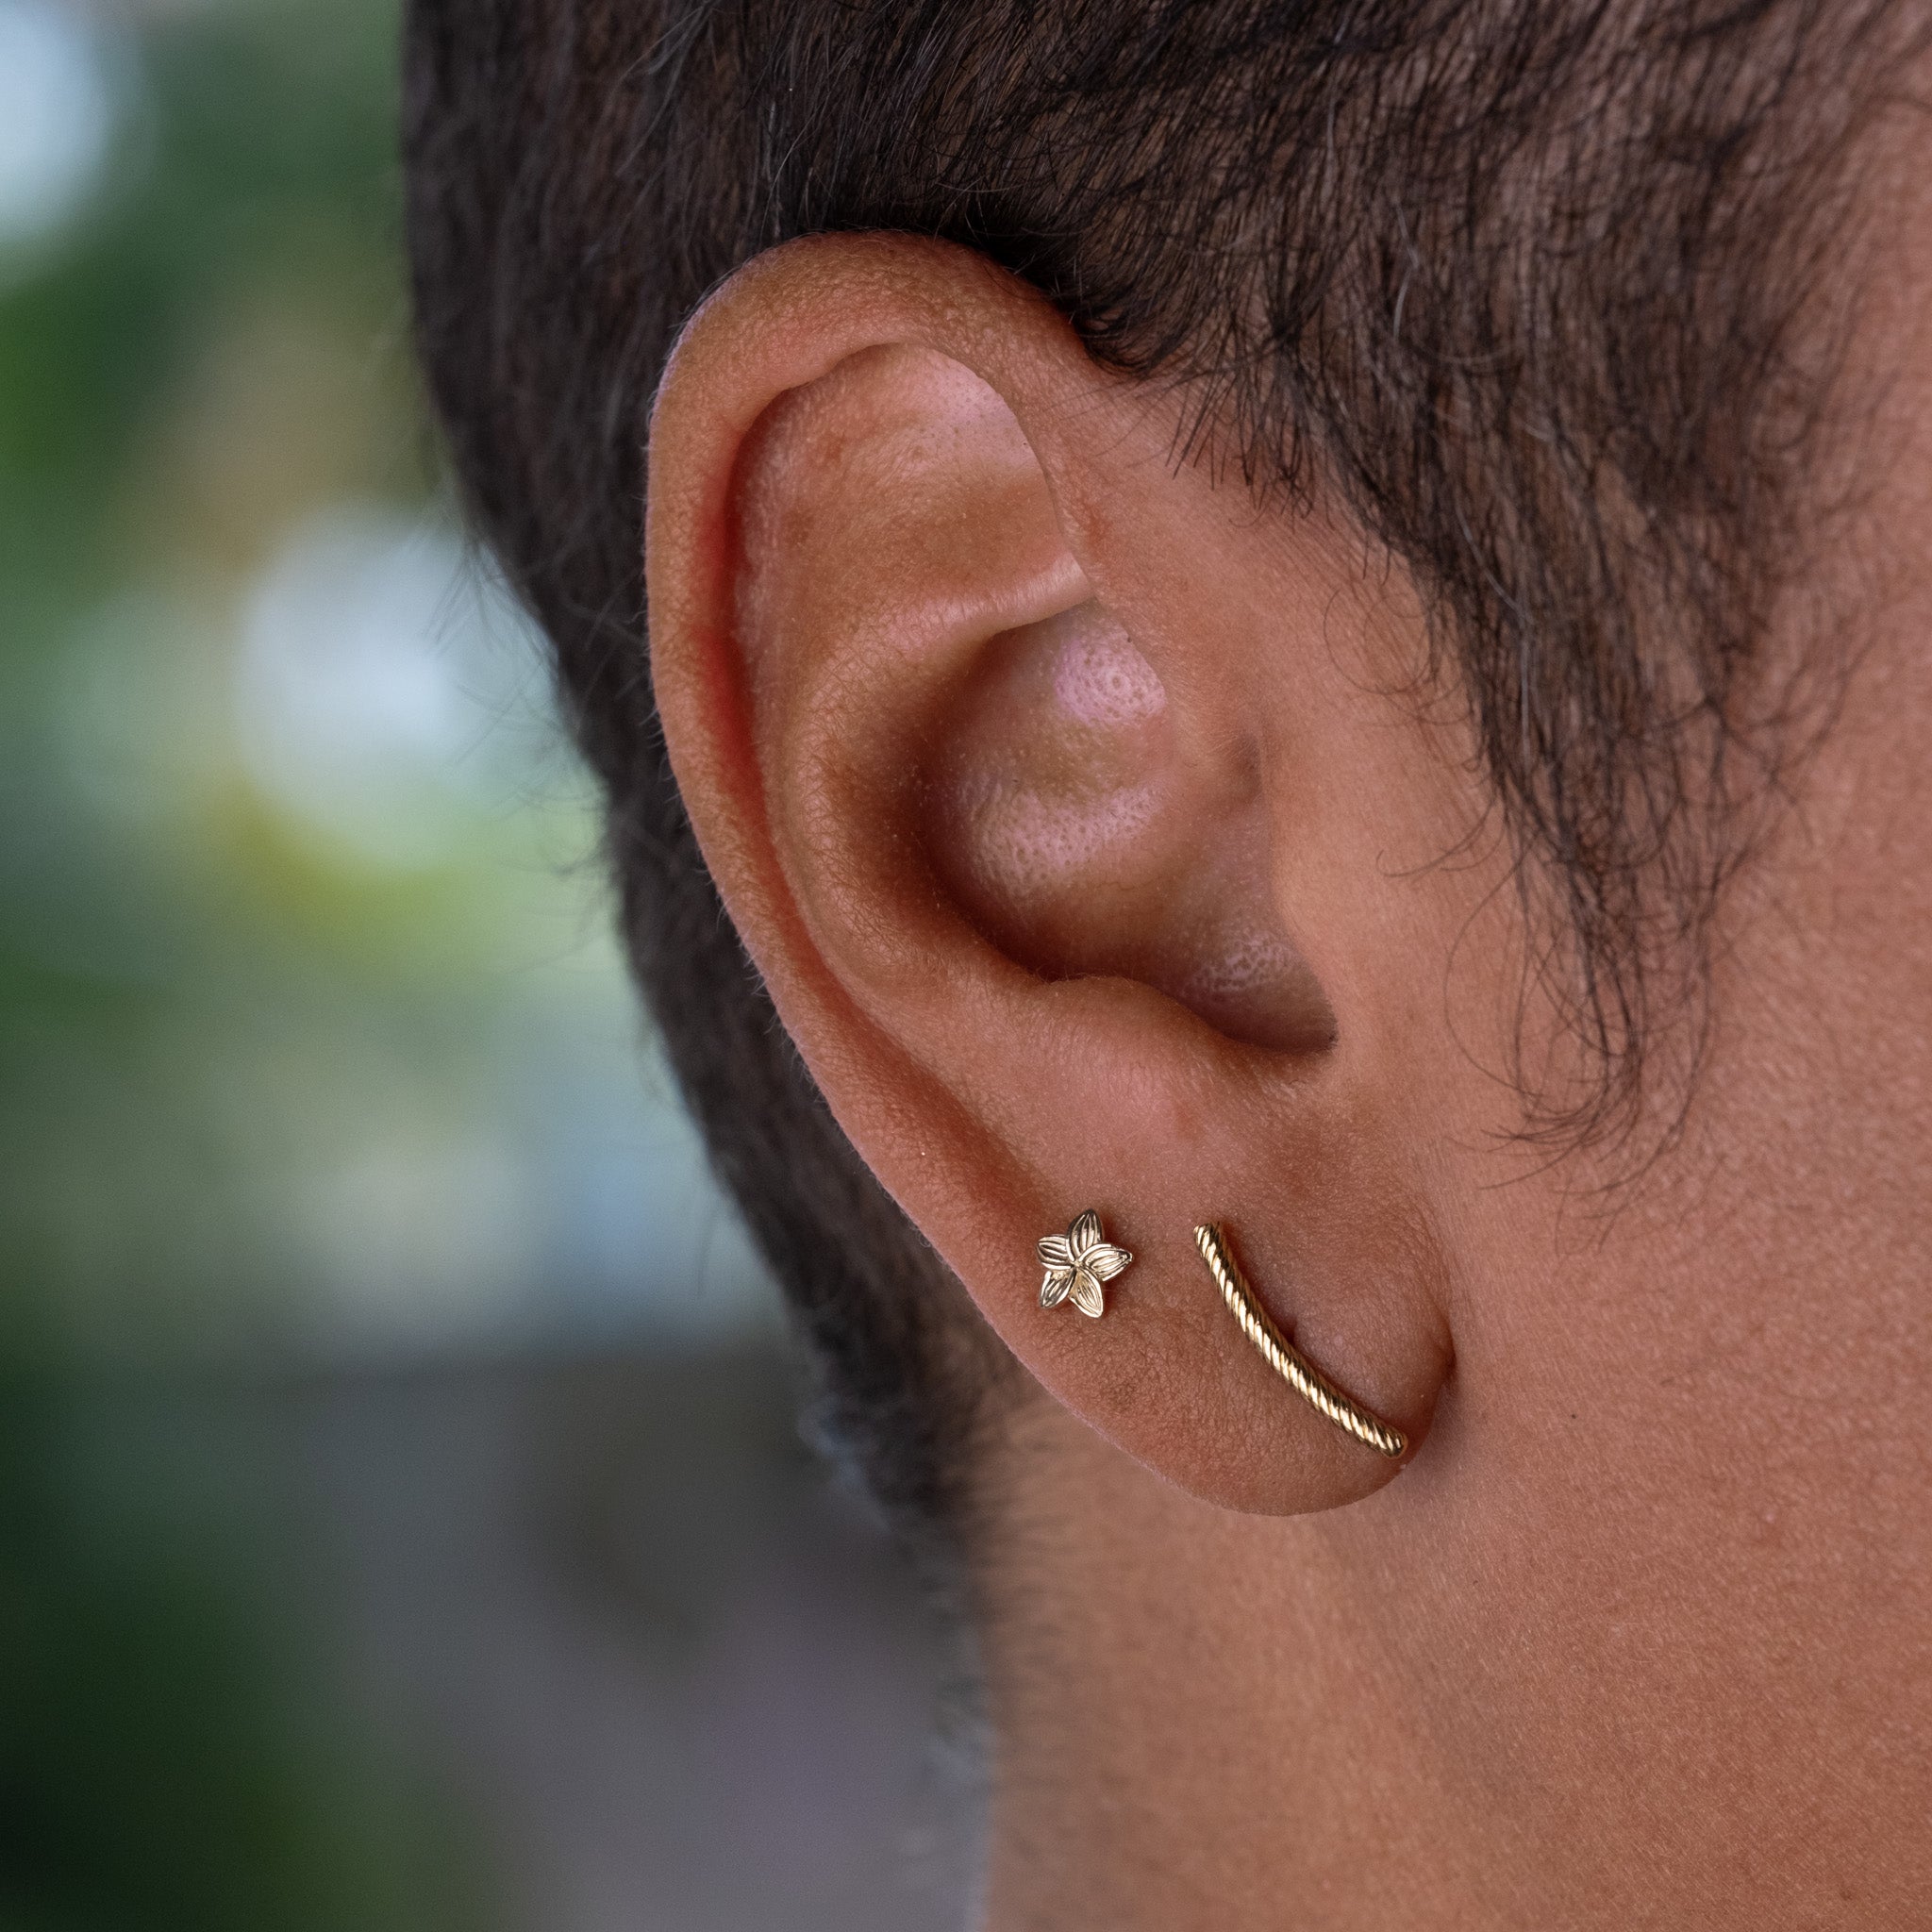 A close up of a person's ear wearing Aiden Jae's Mini Plumeria Studs.